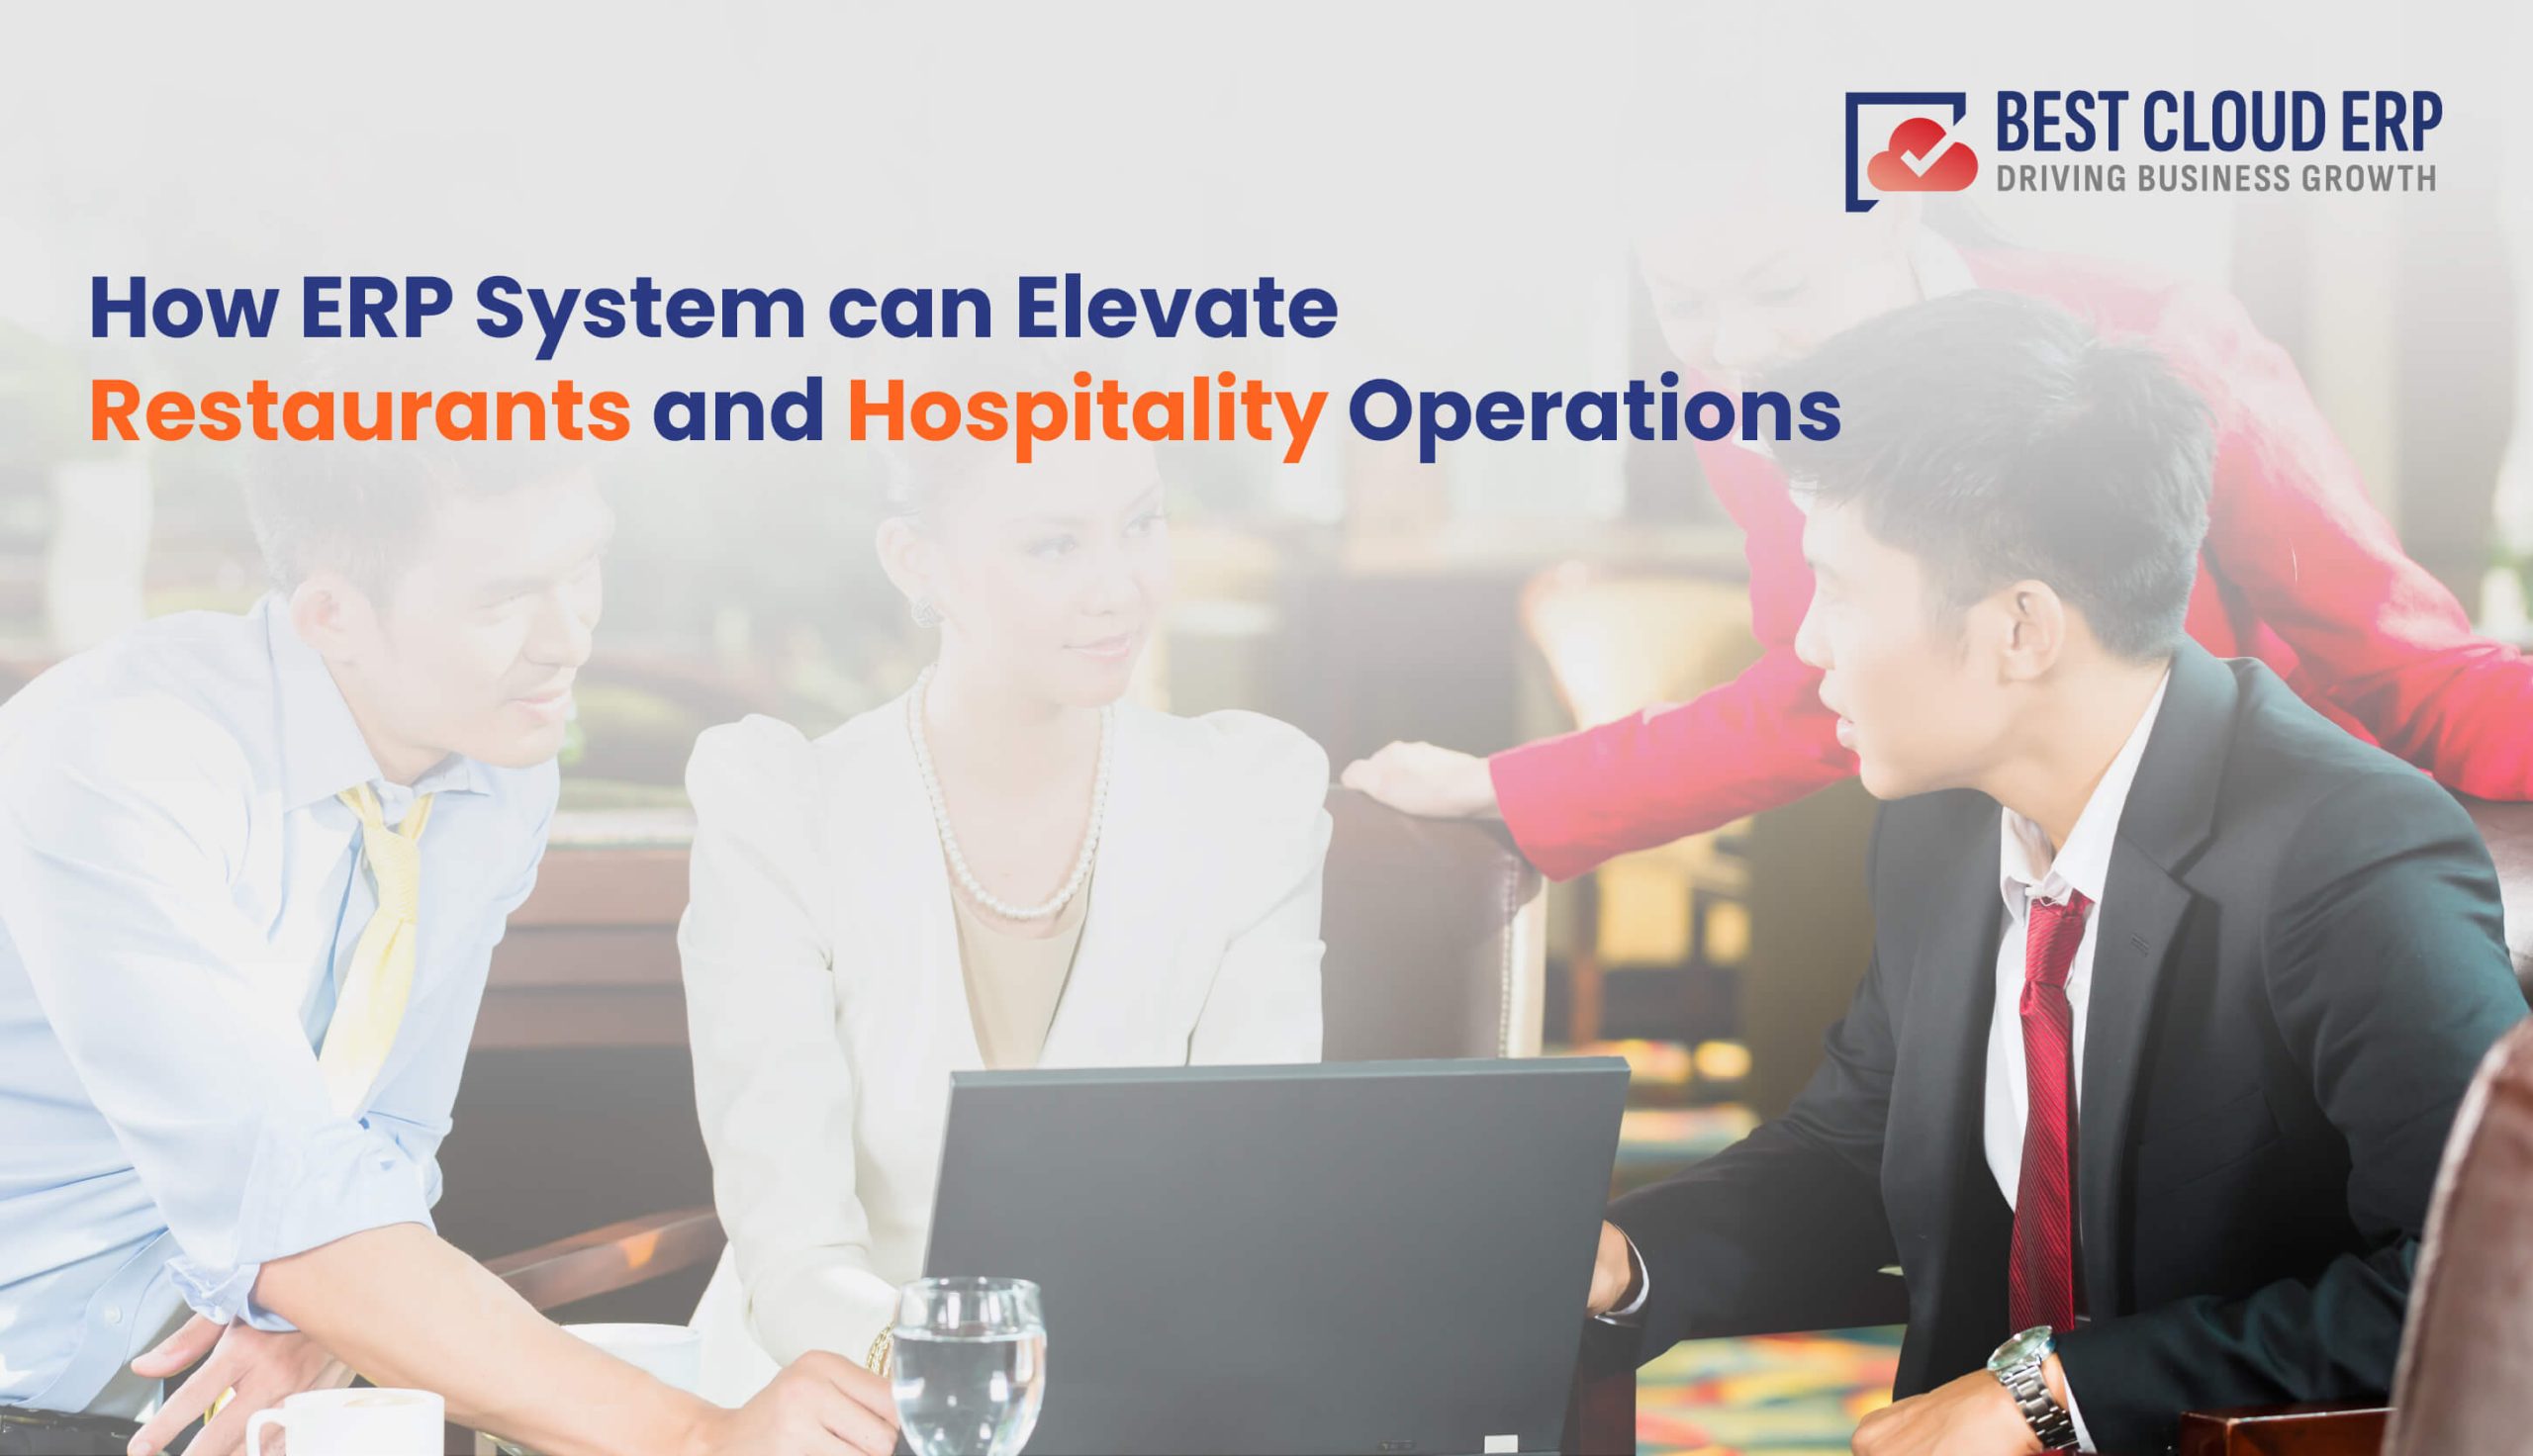 ERP for Restaurant & Hospitality Industry: Recipe for Growth